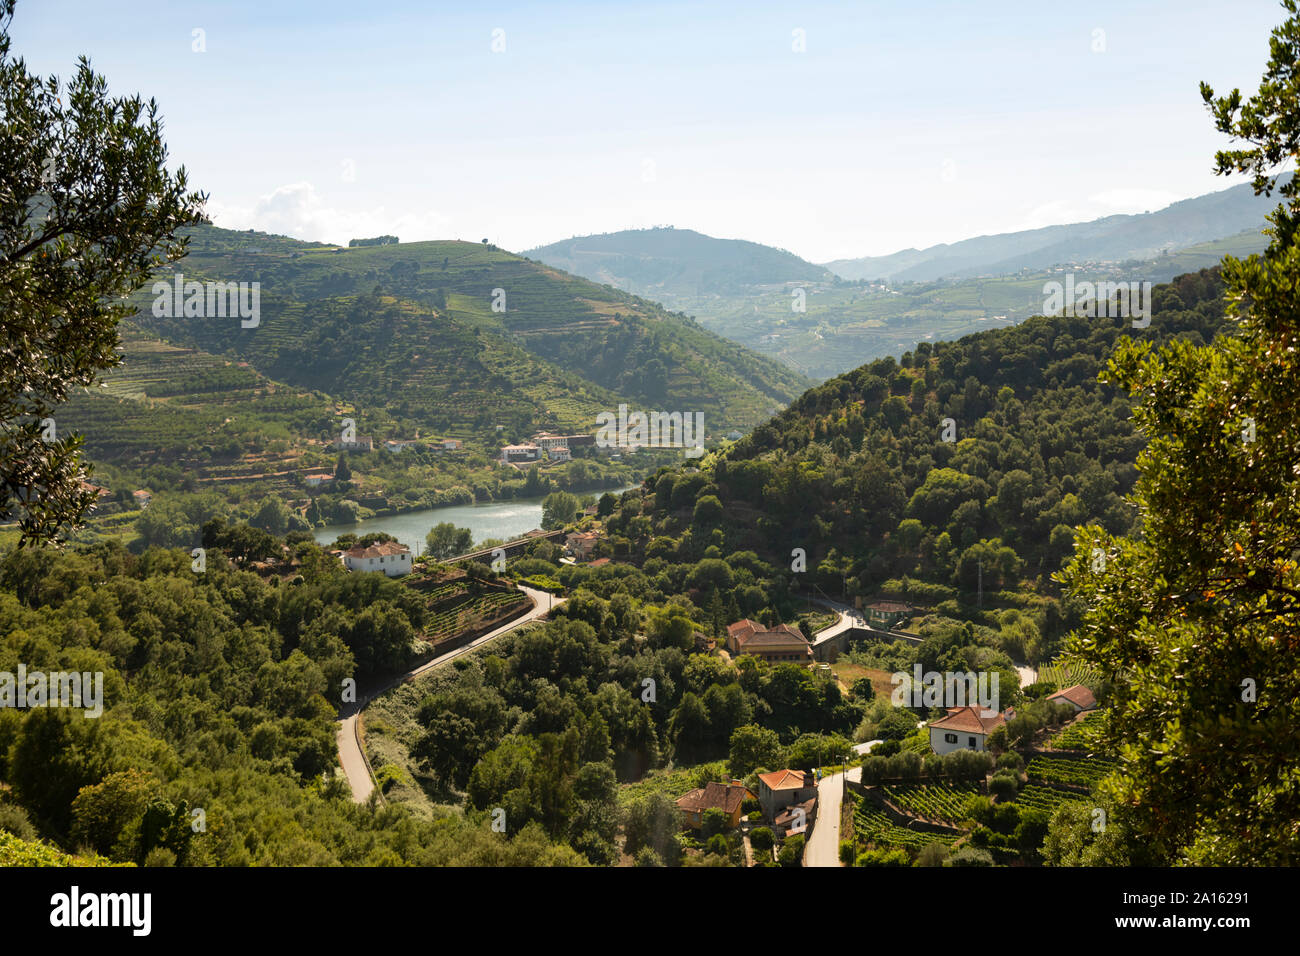 Distant view of vineyards on hill by Duoro river against sky Stock Photo